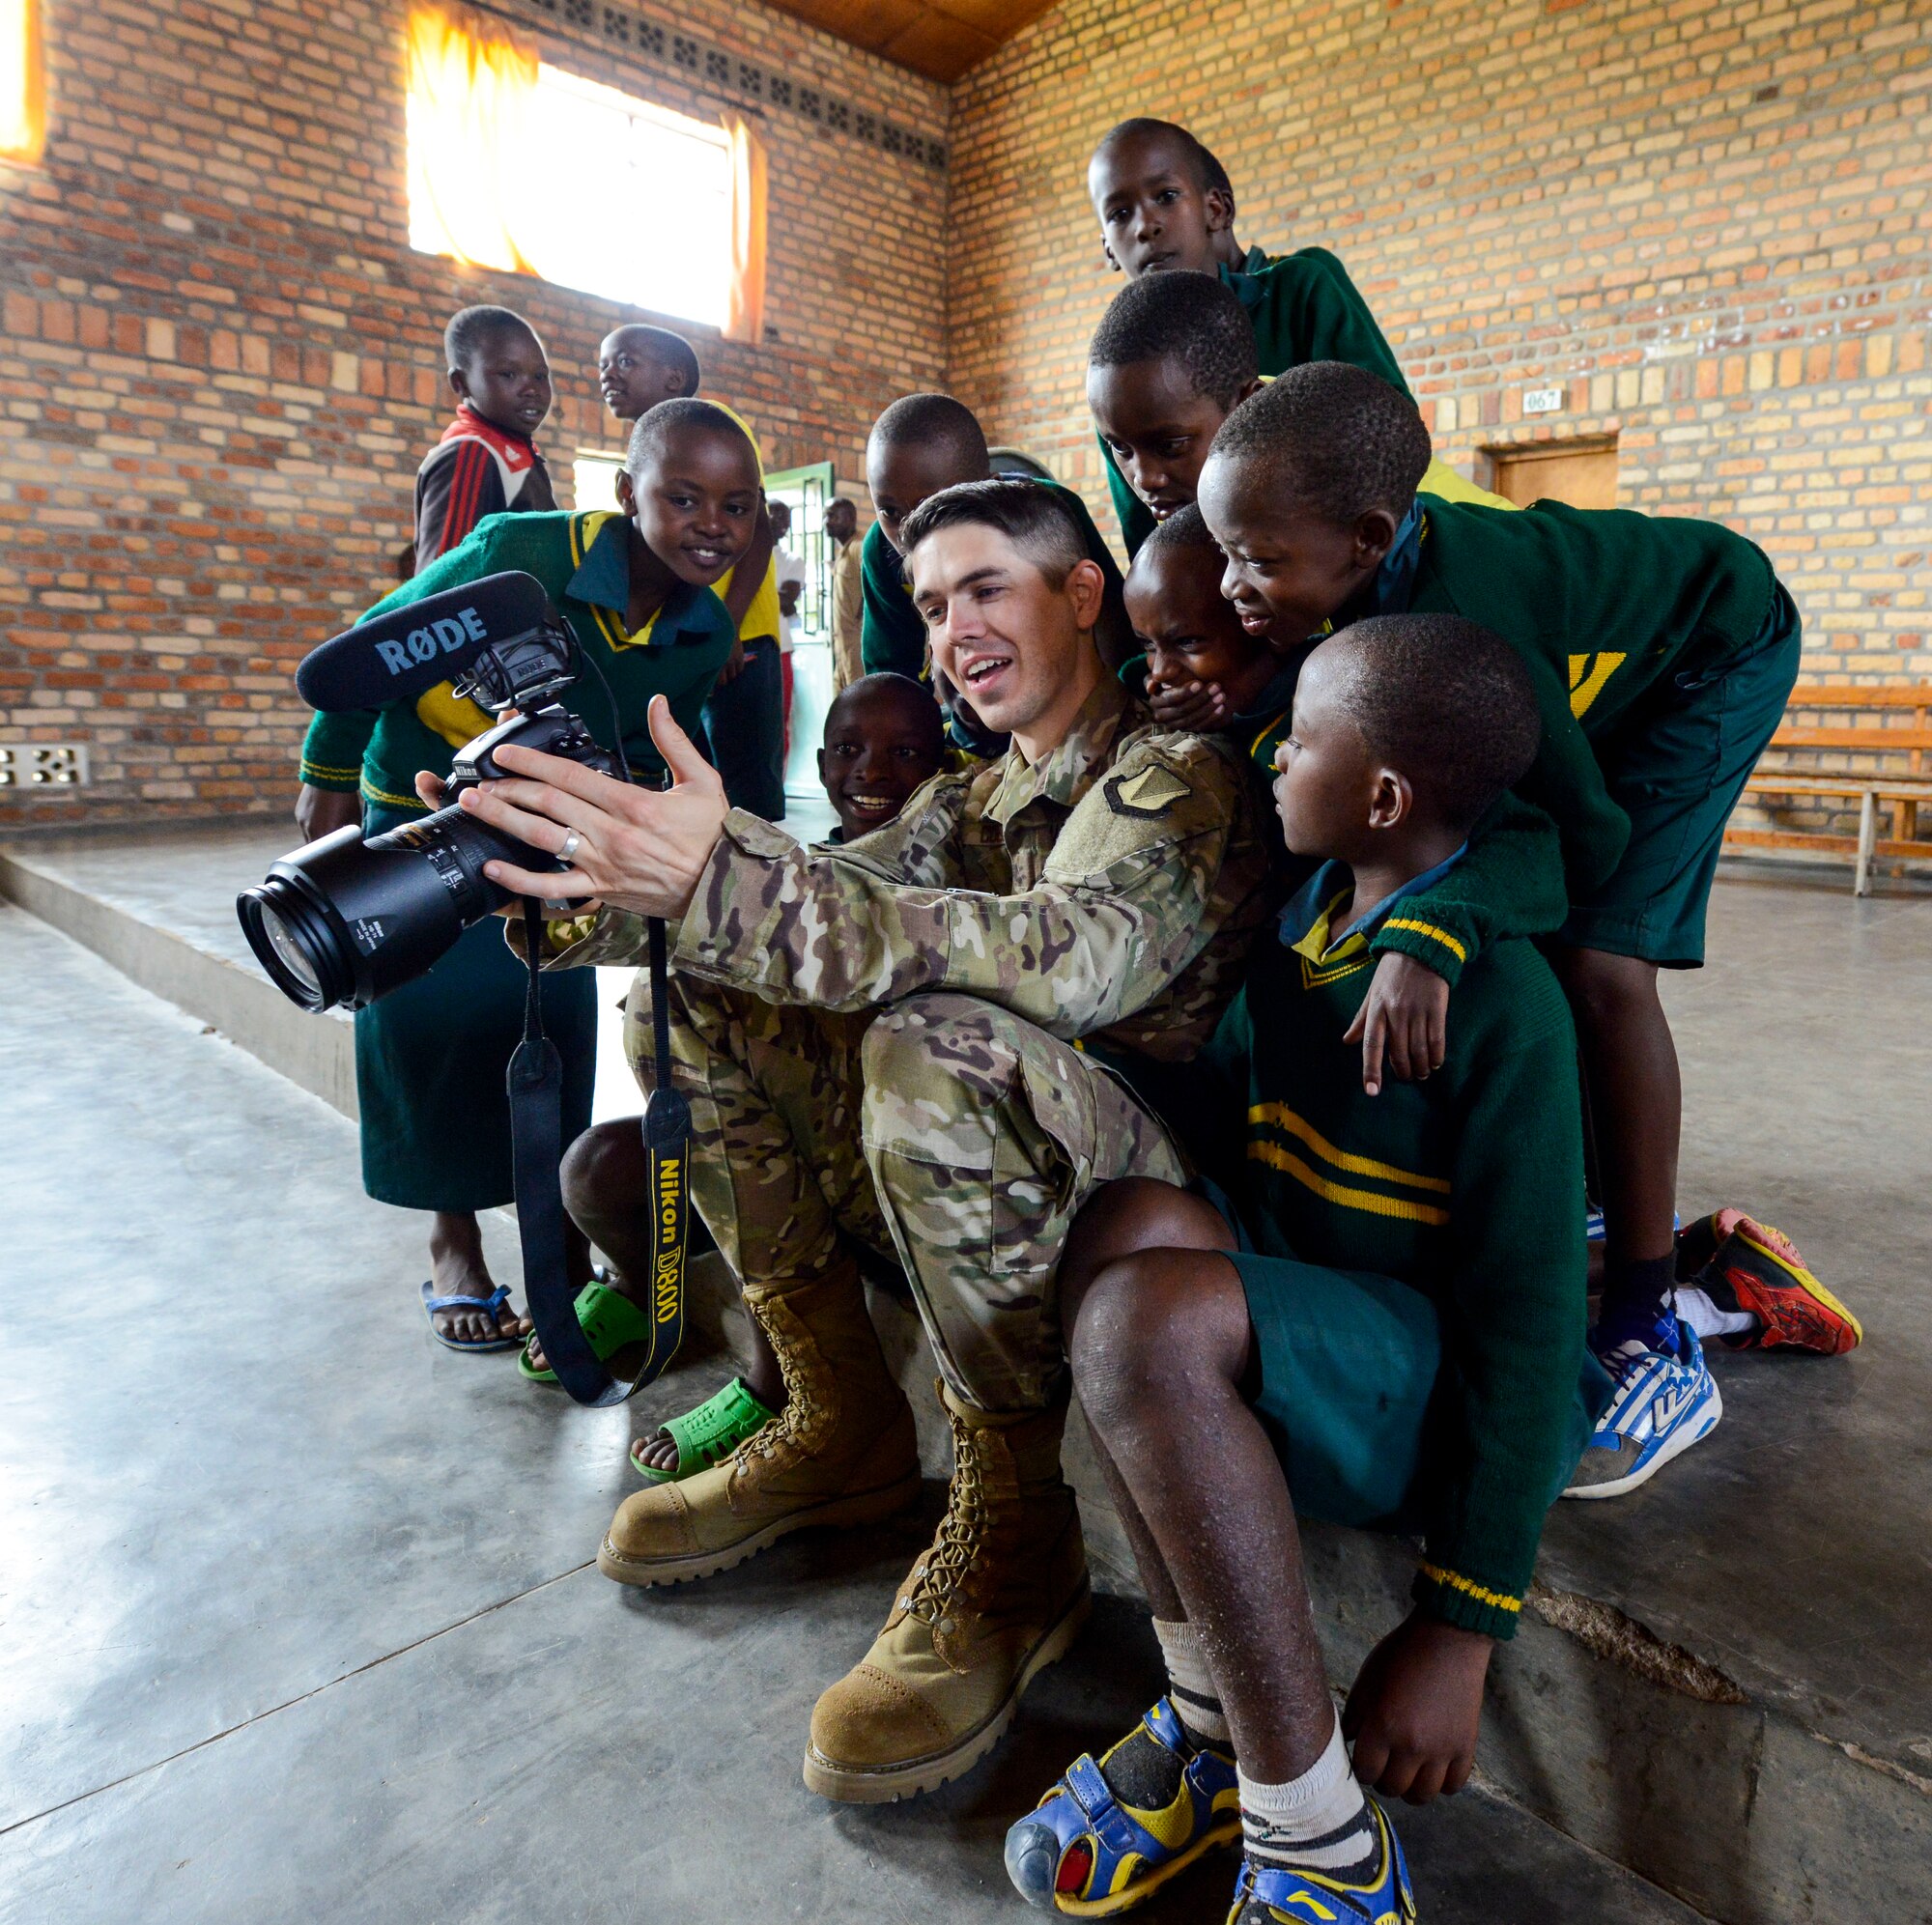 U.S. Air Force Airman 1st Class Noah Coger, 86th Airlift Wing Public Affairs broadcast journalist, shows video to some students of the Home de la vierge des Pauvres Gatagara/Nyanza in the Nyanza District, Rwanda, March 5, 2019. Coger traveled to HVP Nyanza with the U.S. Air Forces in Europe Band, who performed a musical concert for the students. (U.S. Air Forces photo by Tech. Sgt. Timothy Moore)